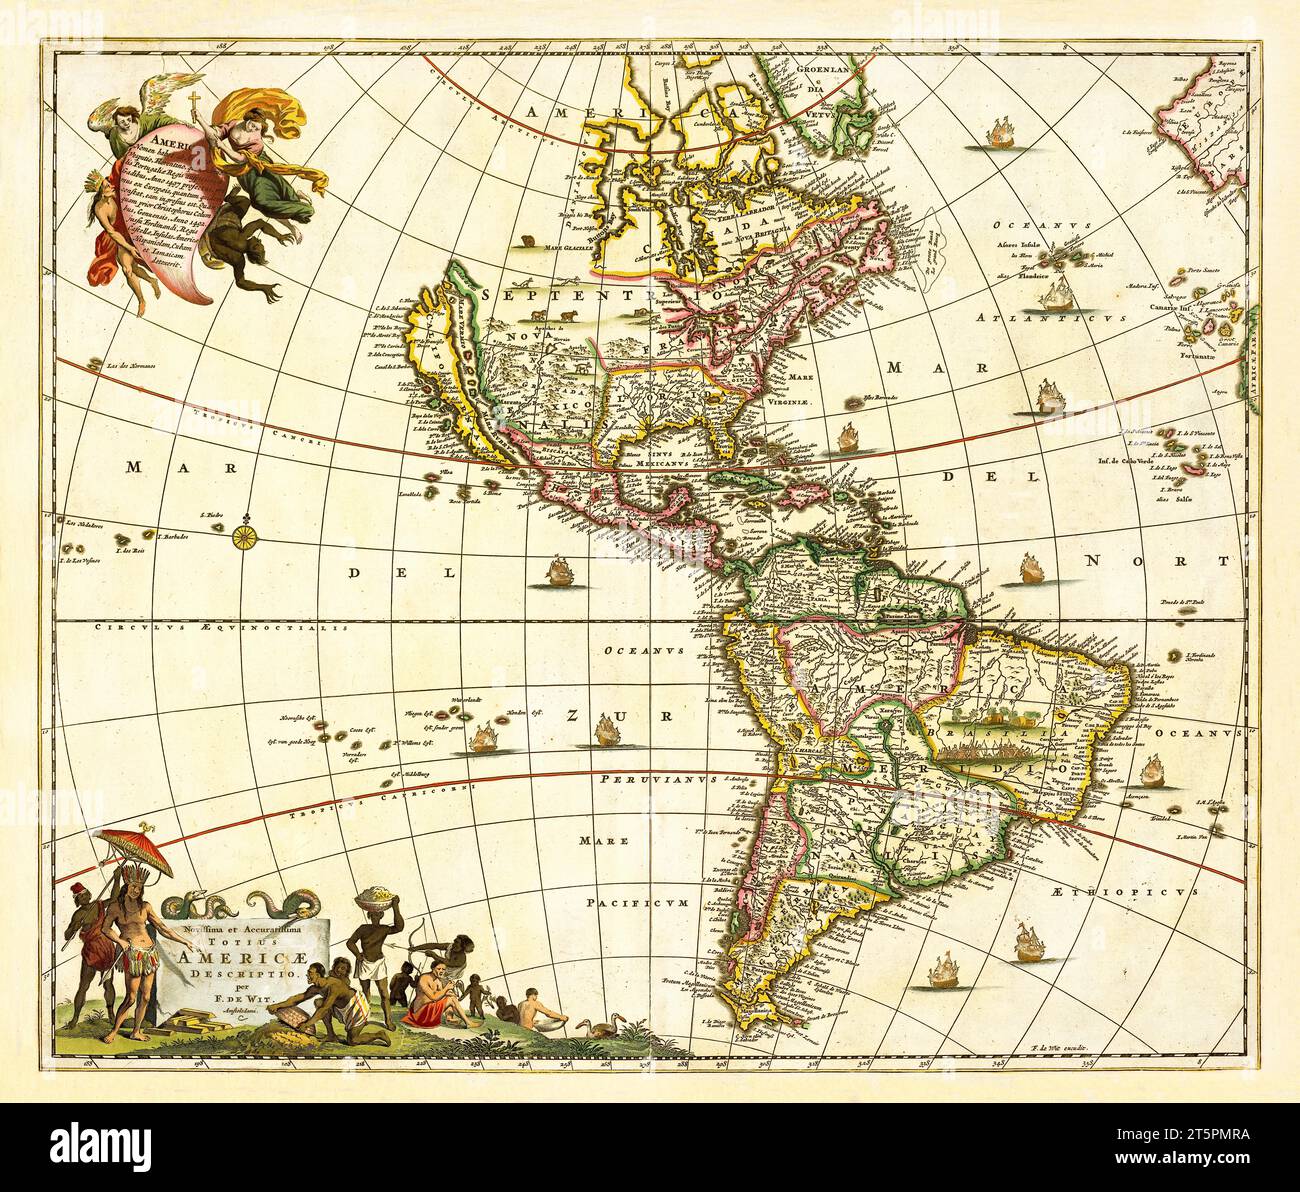 Old map of America. By De Wit, publ. ca. 1670 Stock Photo